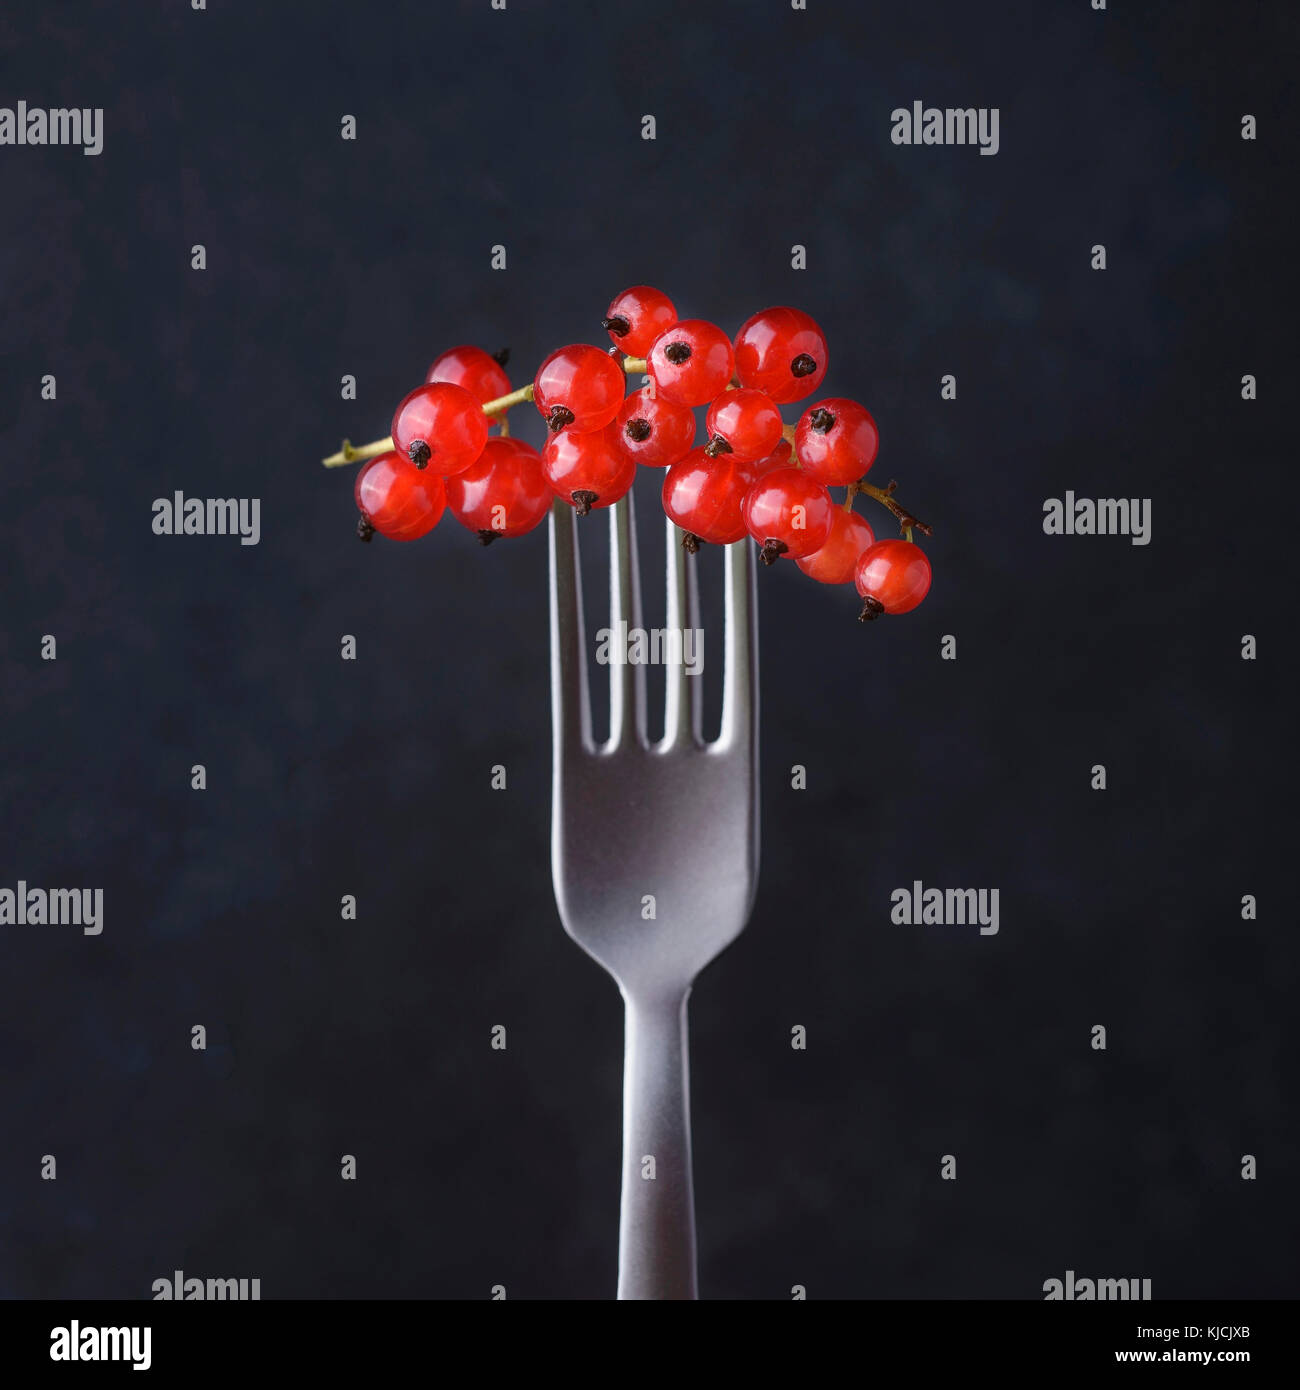 Red berries on fork Stock Photo